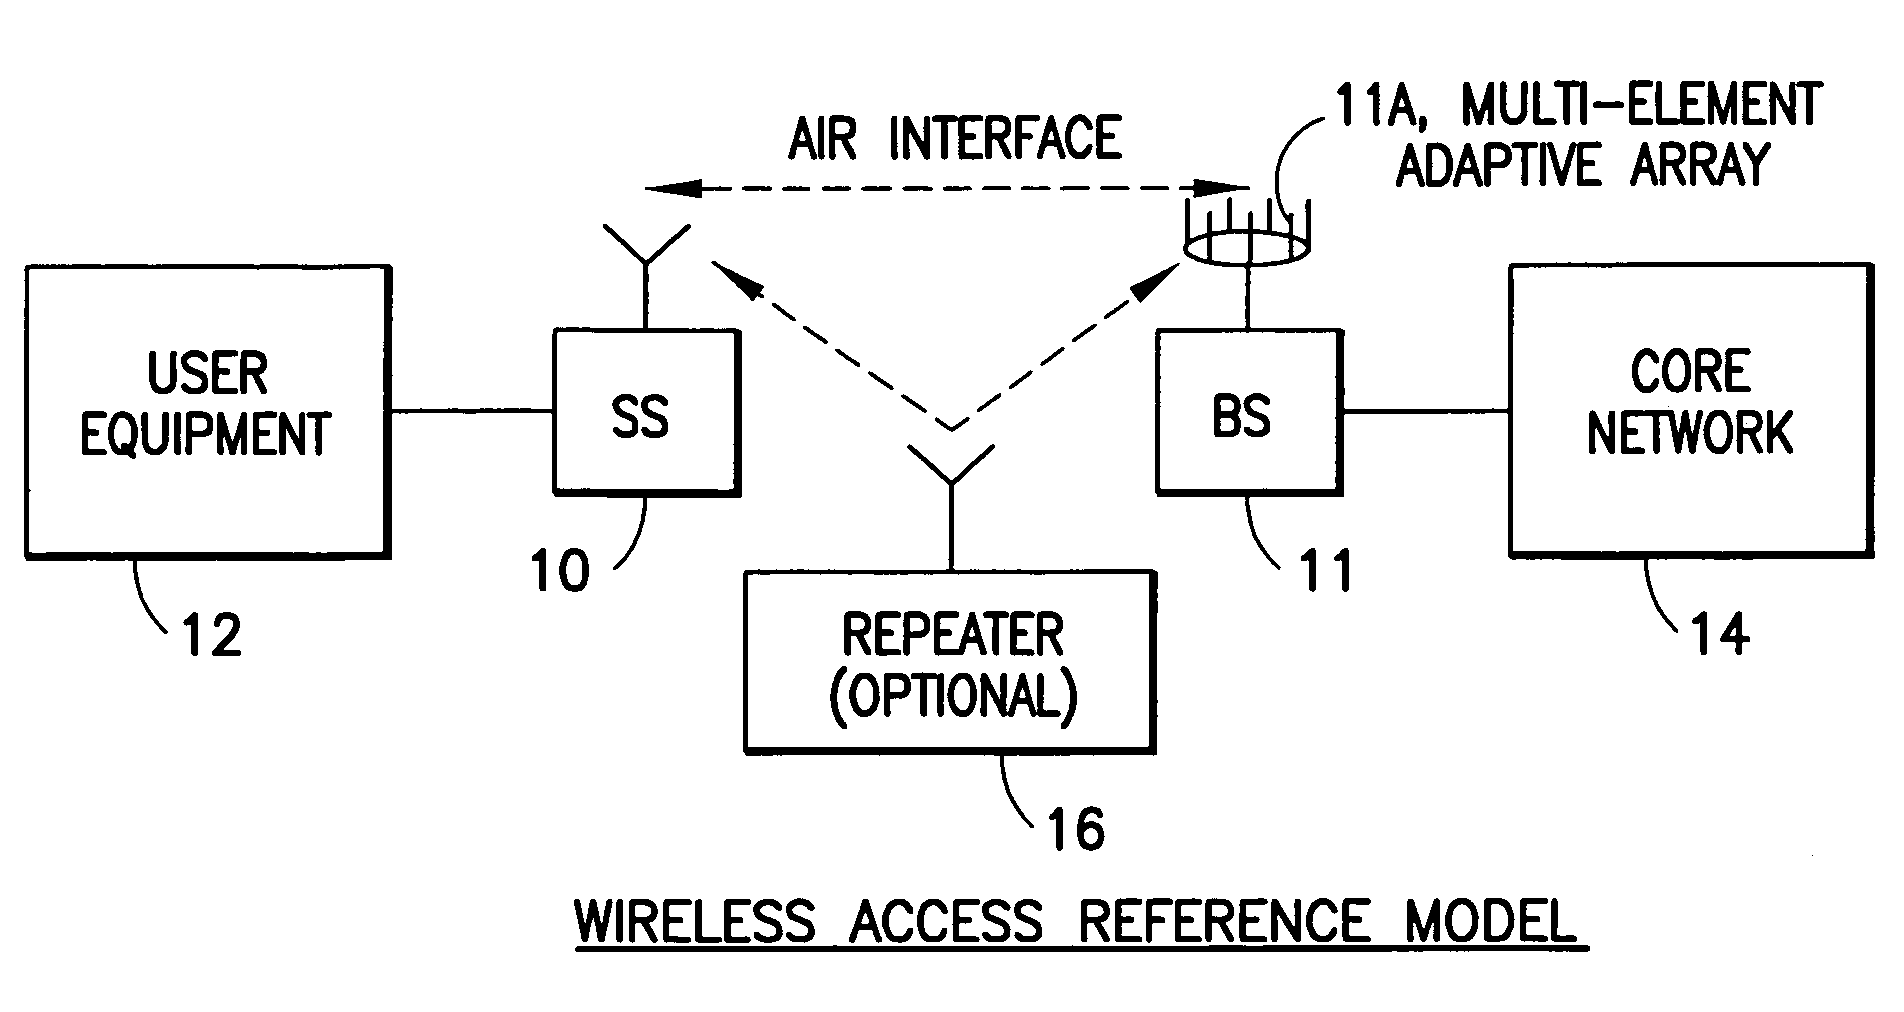 Use of wide element spacing to improve the flexibility of a circular base station antenna array in a space division/multiple access synchronous CDMA communication system